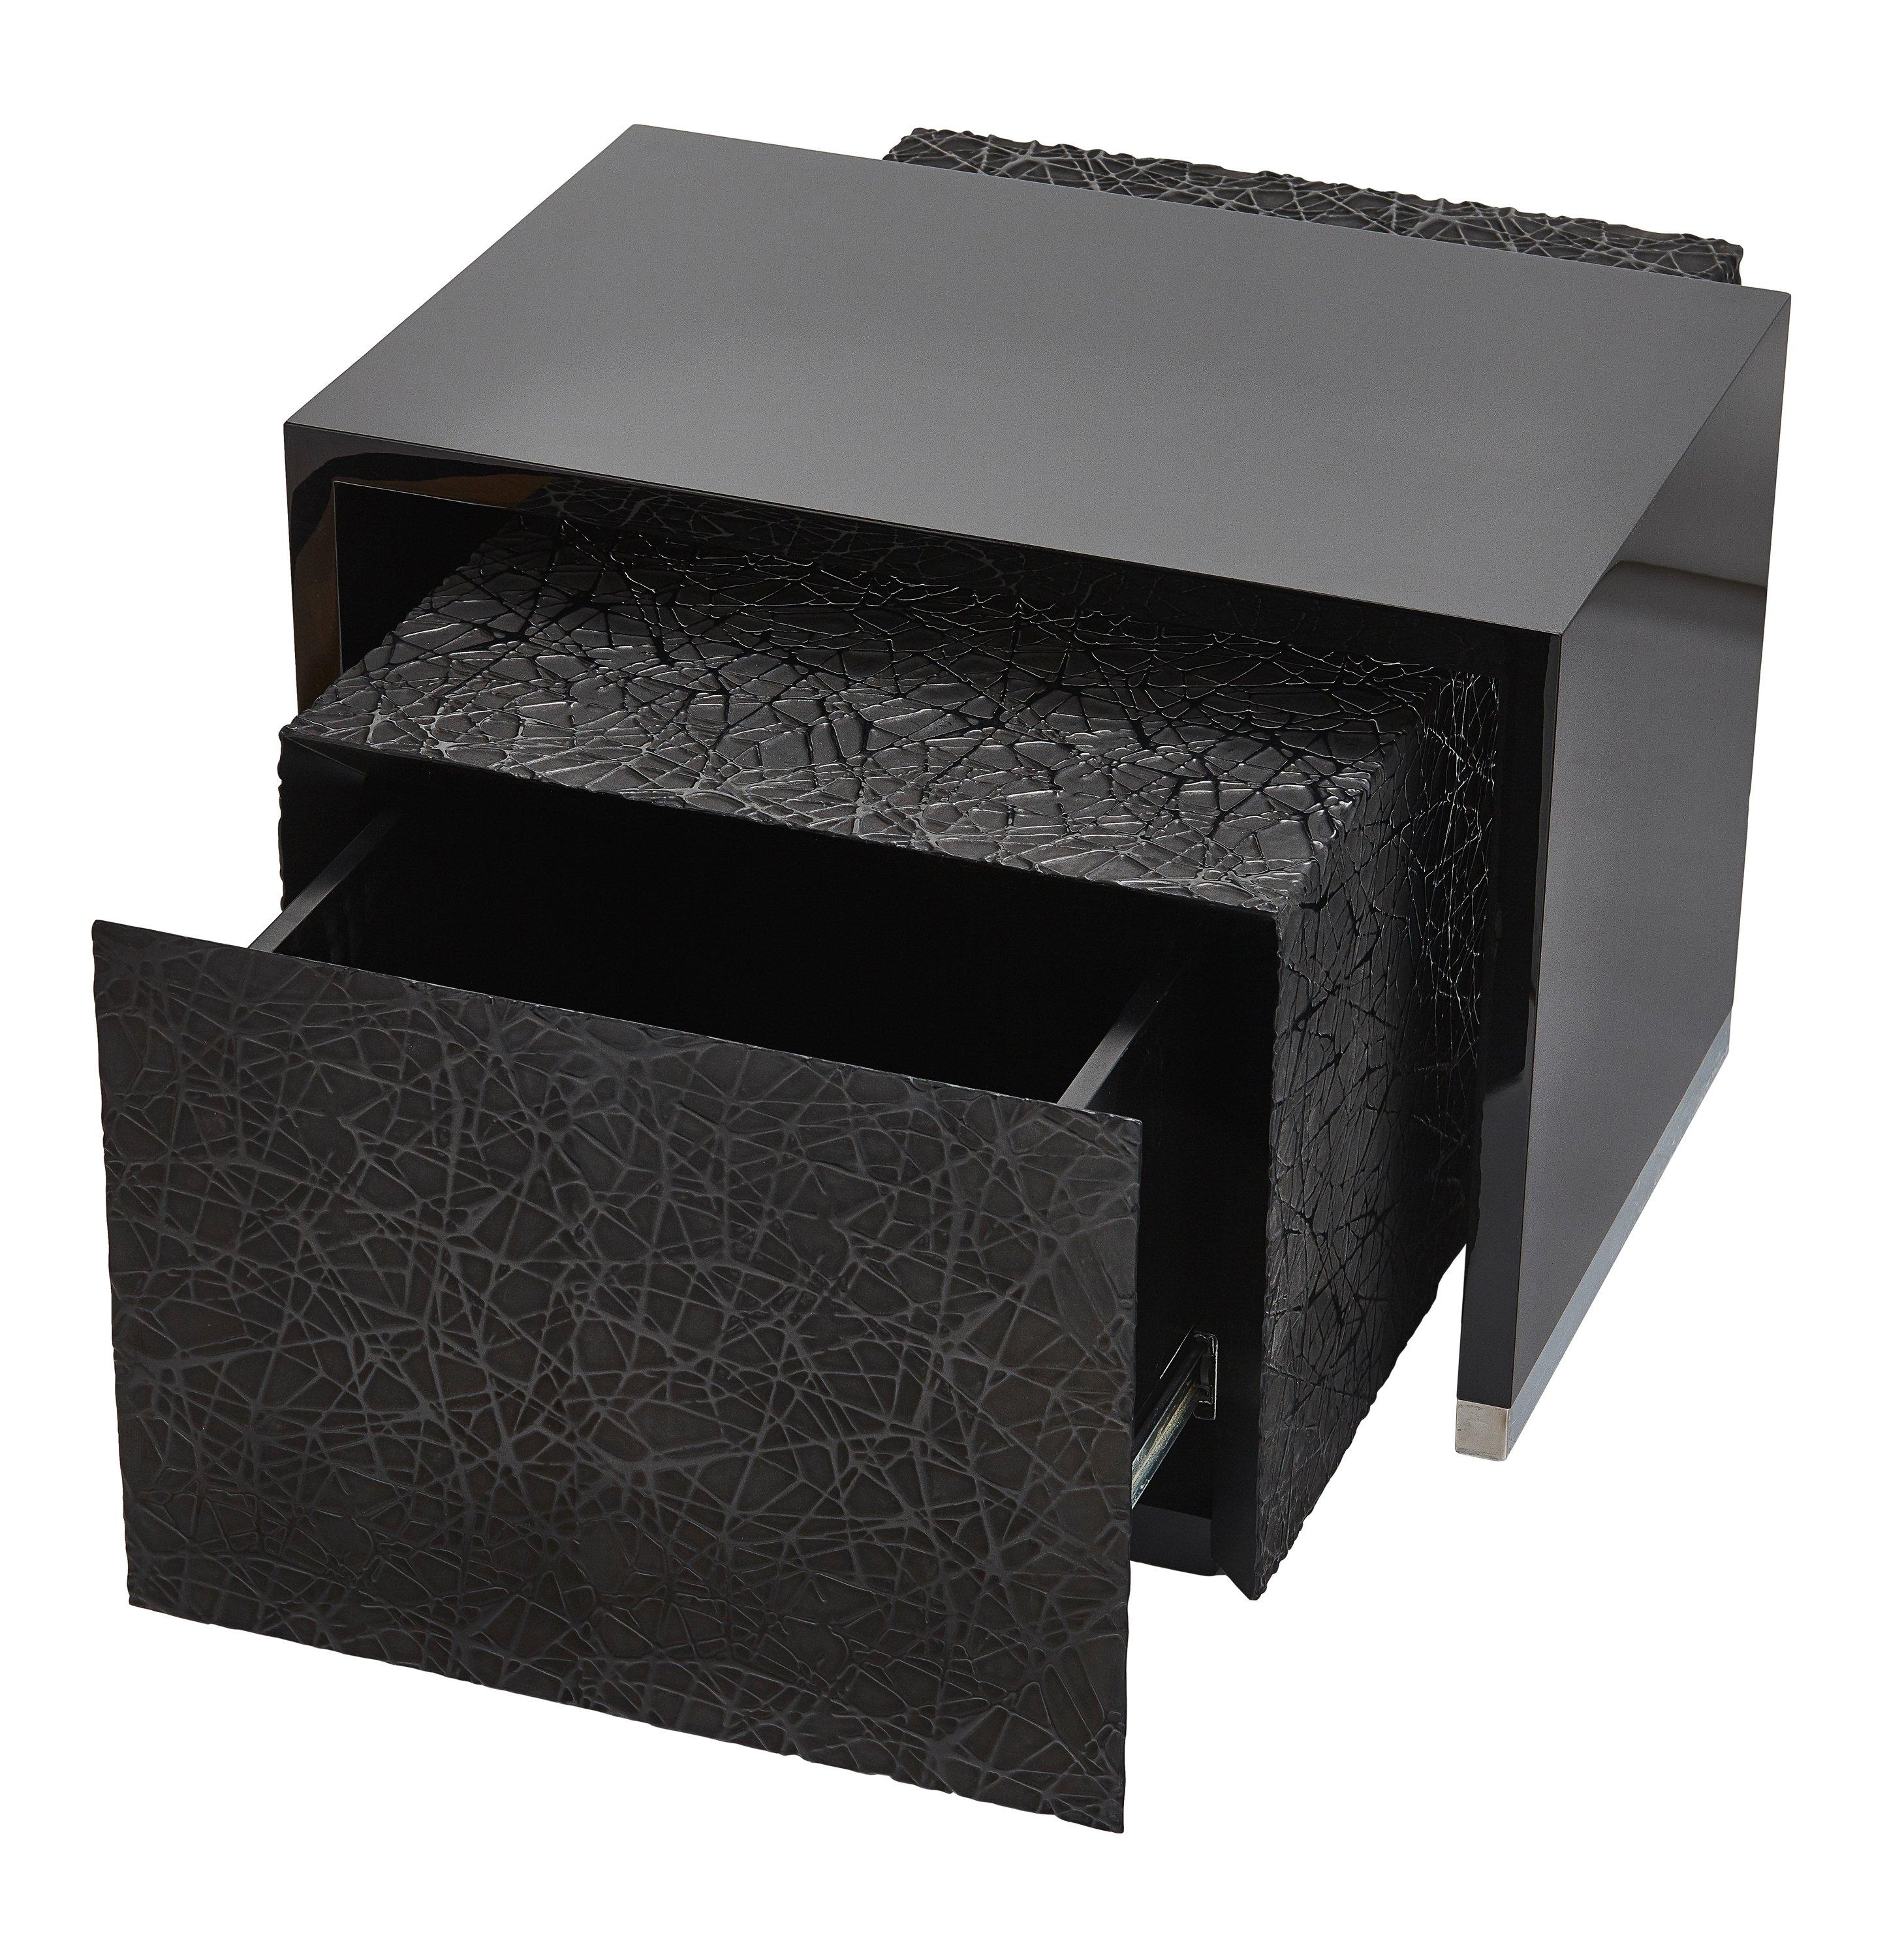 Polish Duo Side Tables with Piano Black Lacquer and Resin Art Texture, Available Now For Sale